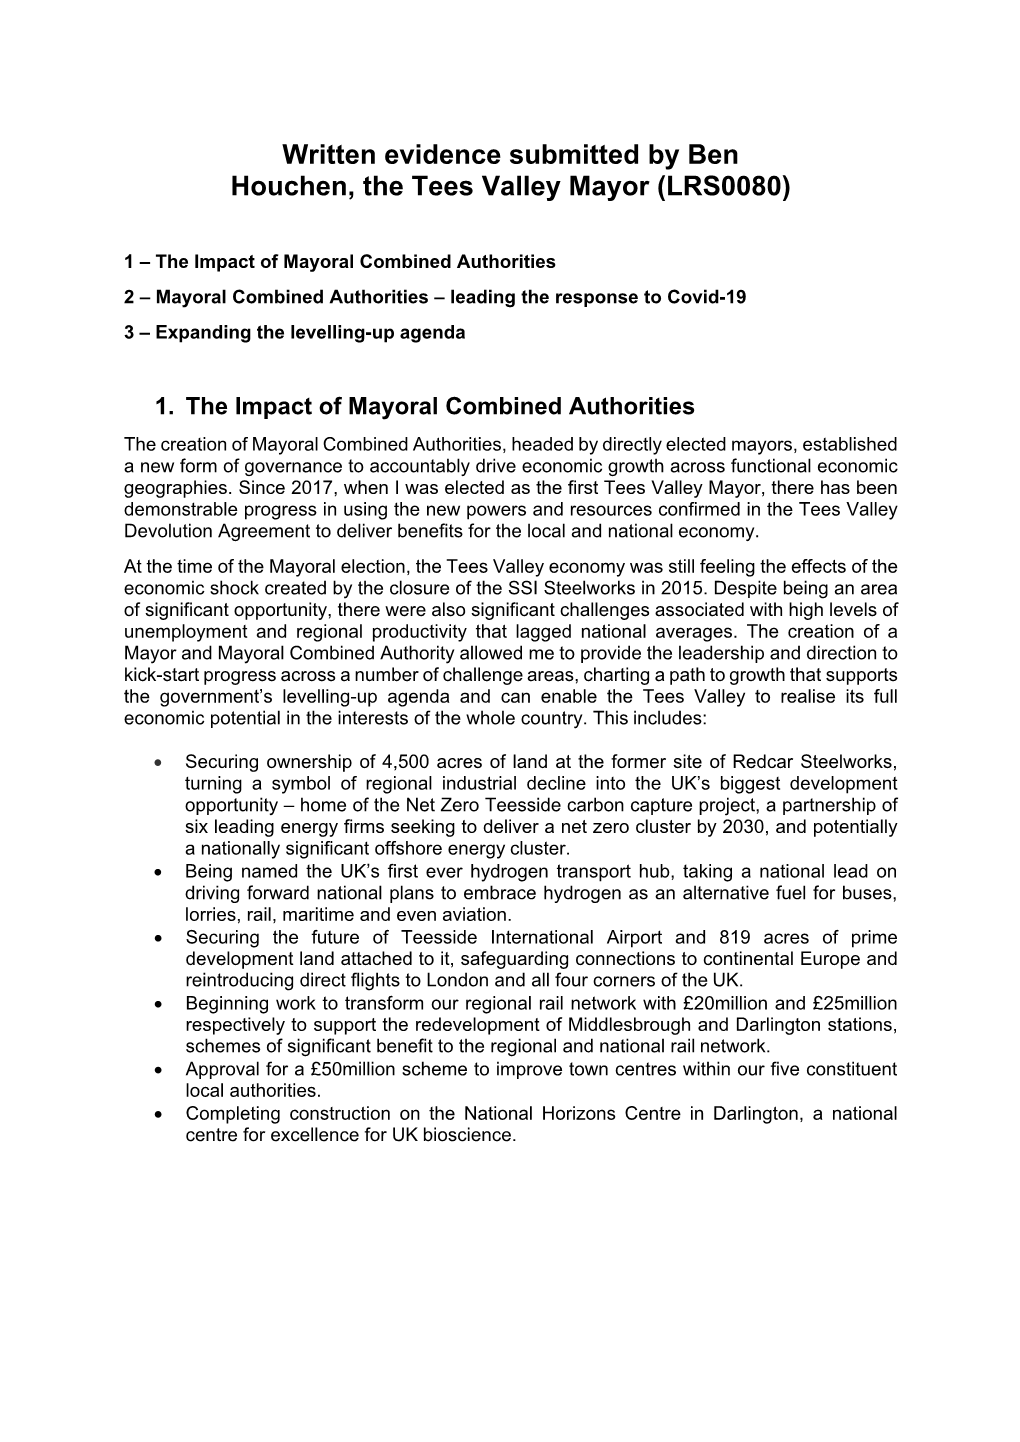 Written Evidence Submitted by Ben Houchen, the Tees Valley Mayor (LRS0080)